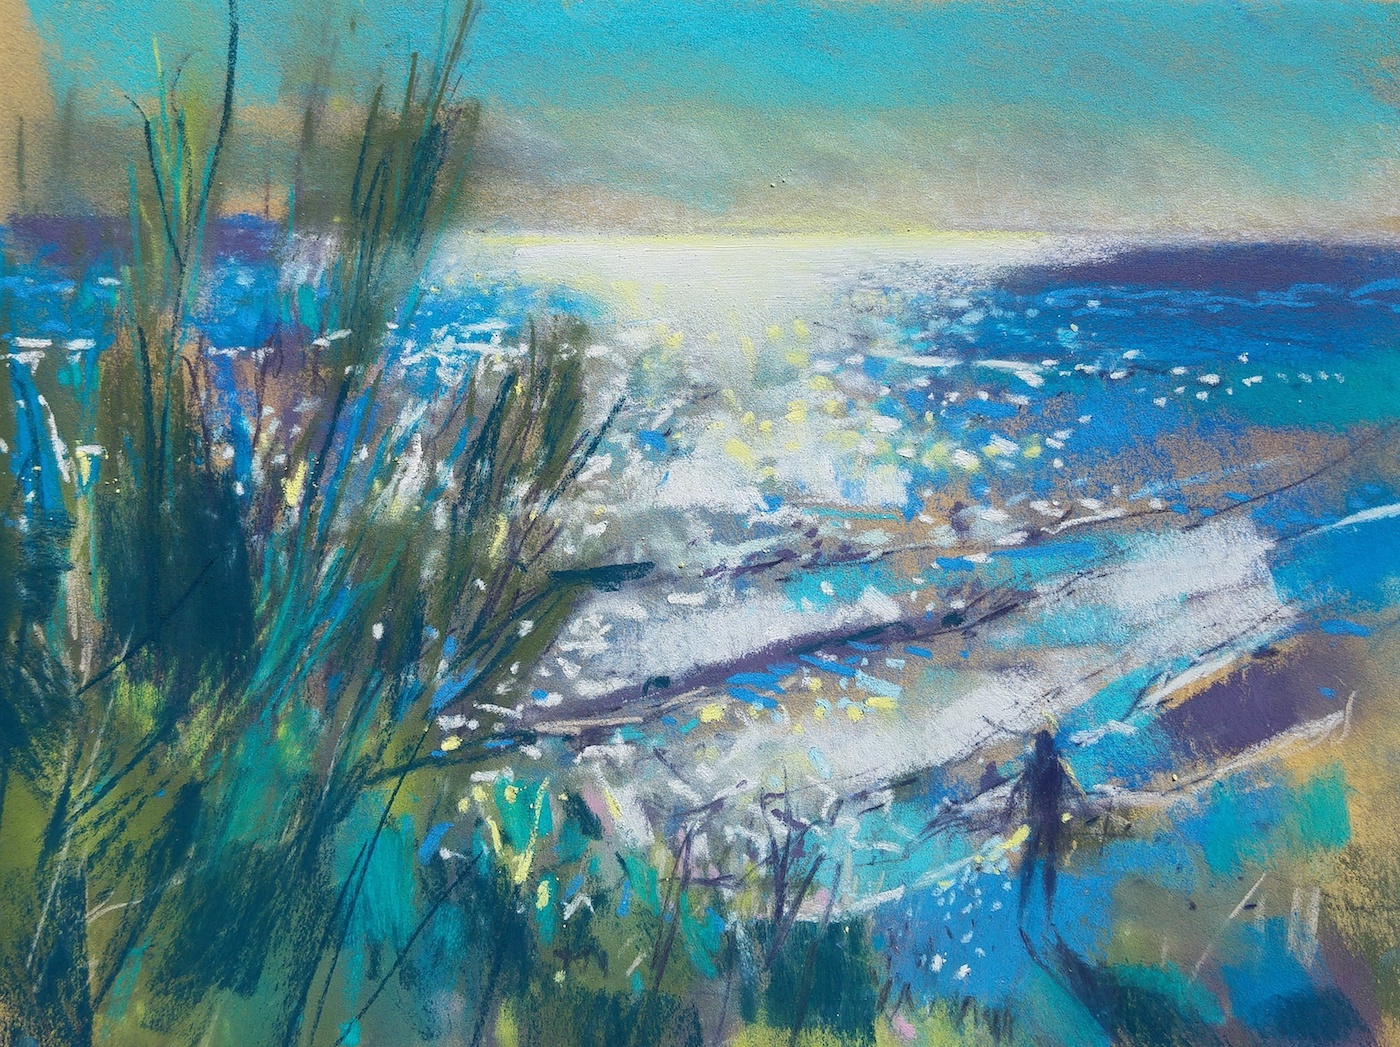 Richard Suckling, "Horadada Beach," Unison and Sennelier pastels on Sennelier LaCarte, 9 ½ x 12 ½ in. Very bright high contrast scene - just squinted and went for it.